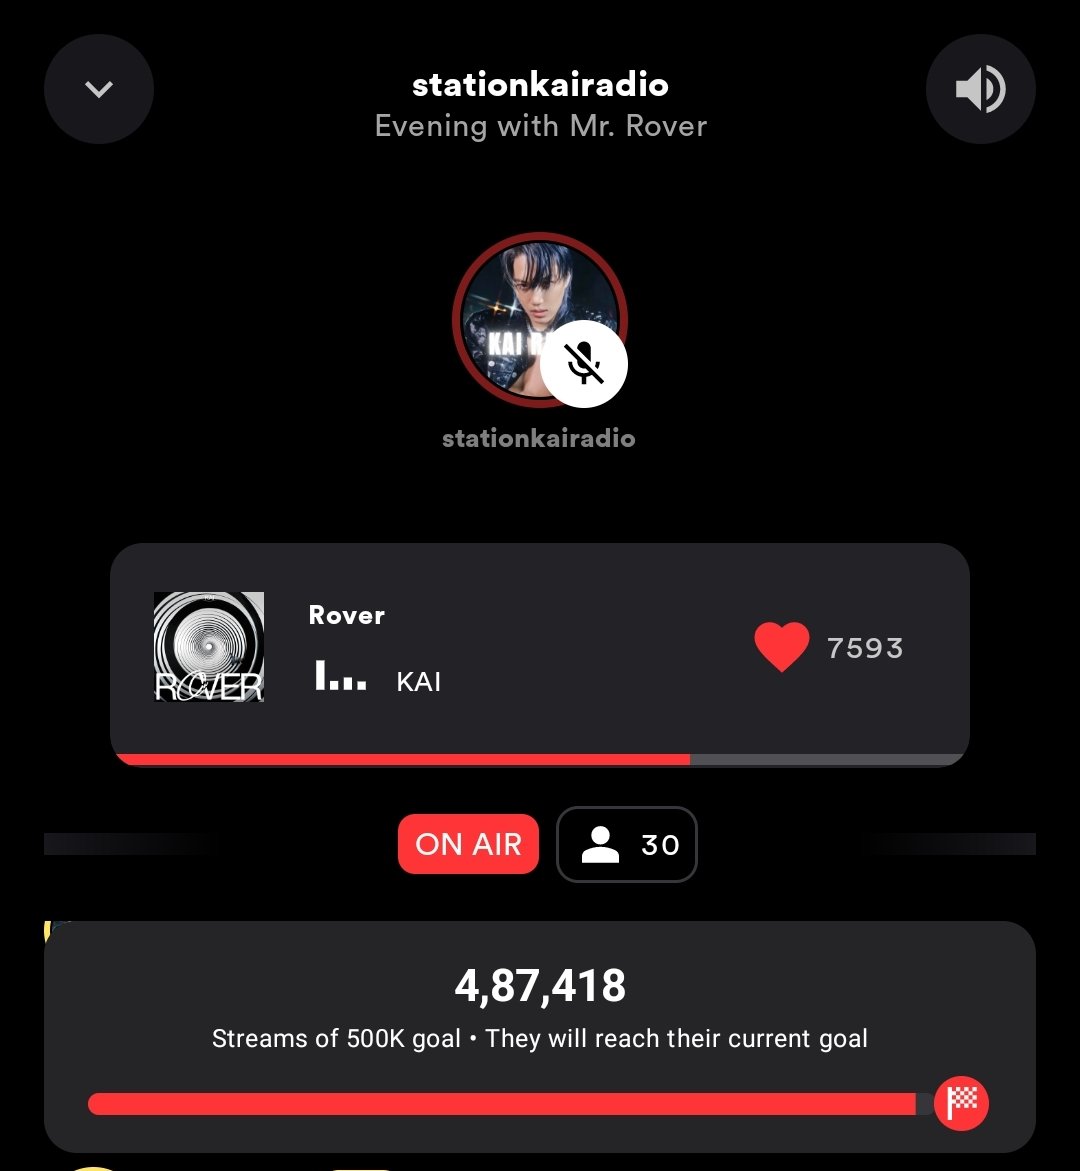 Guys.. We're so close to our goal, please don't be lazy today, join in here and unlock the 500K goal today 🔥 We can do this only if we have your support, please keep joining 🙏 🔗: stationhead.com/stationkairadio #KAI #KAI_Rover #Rover100MParty